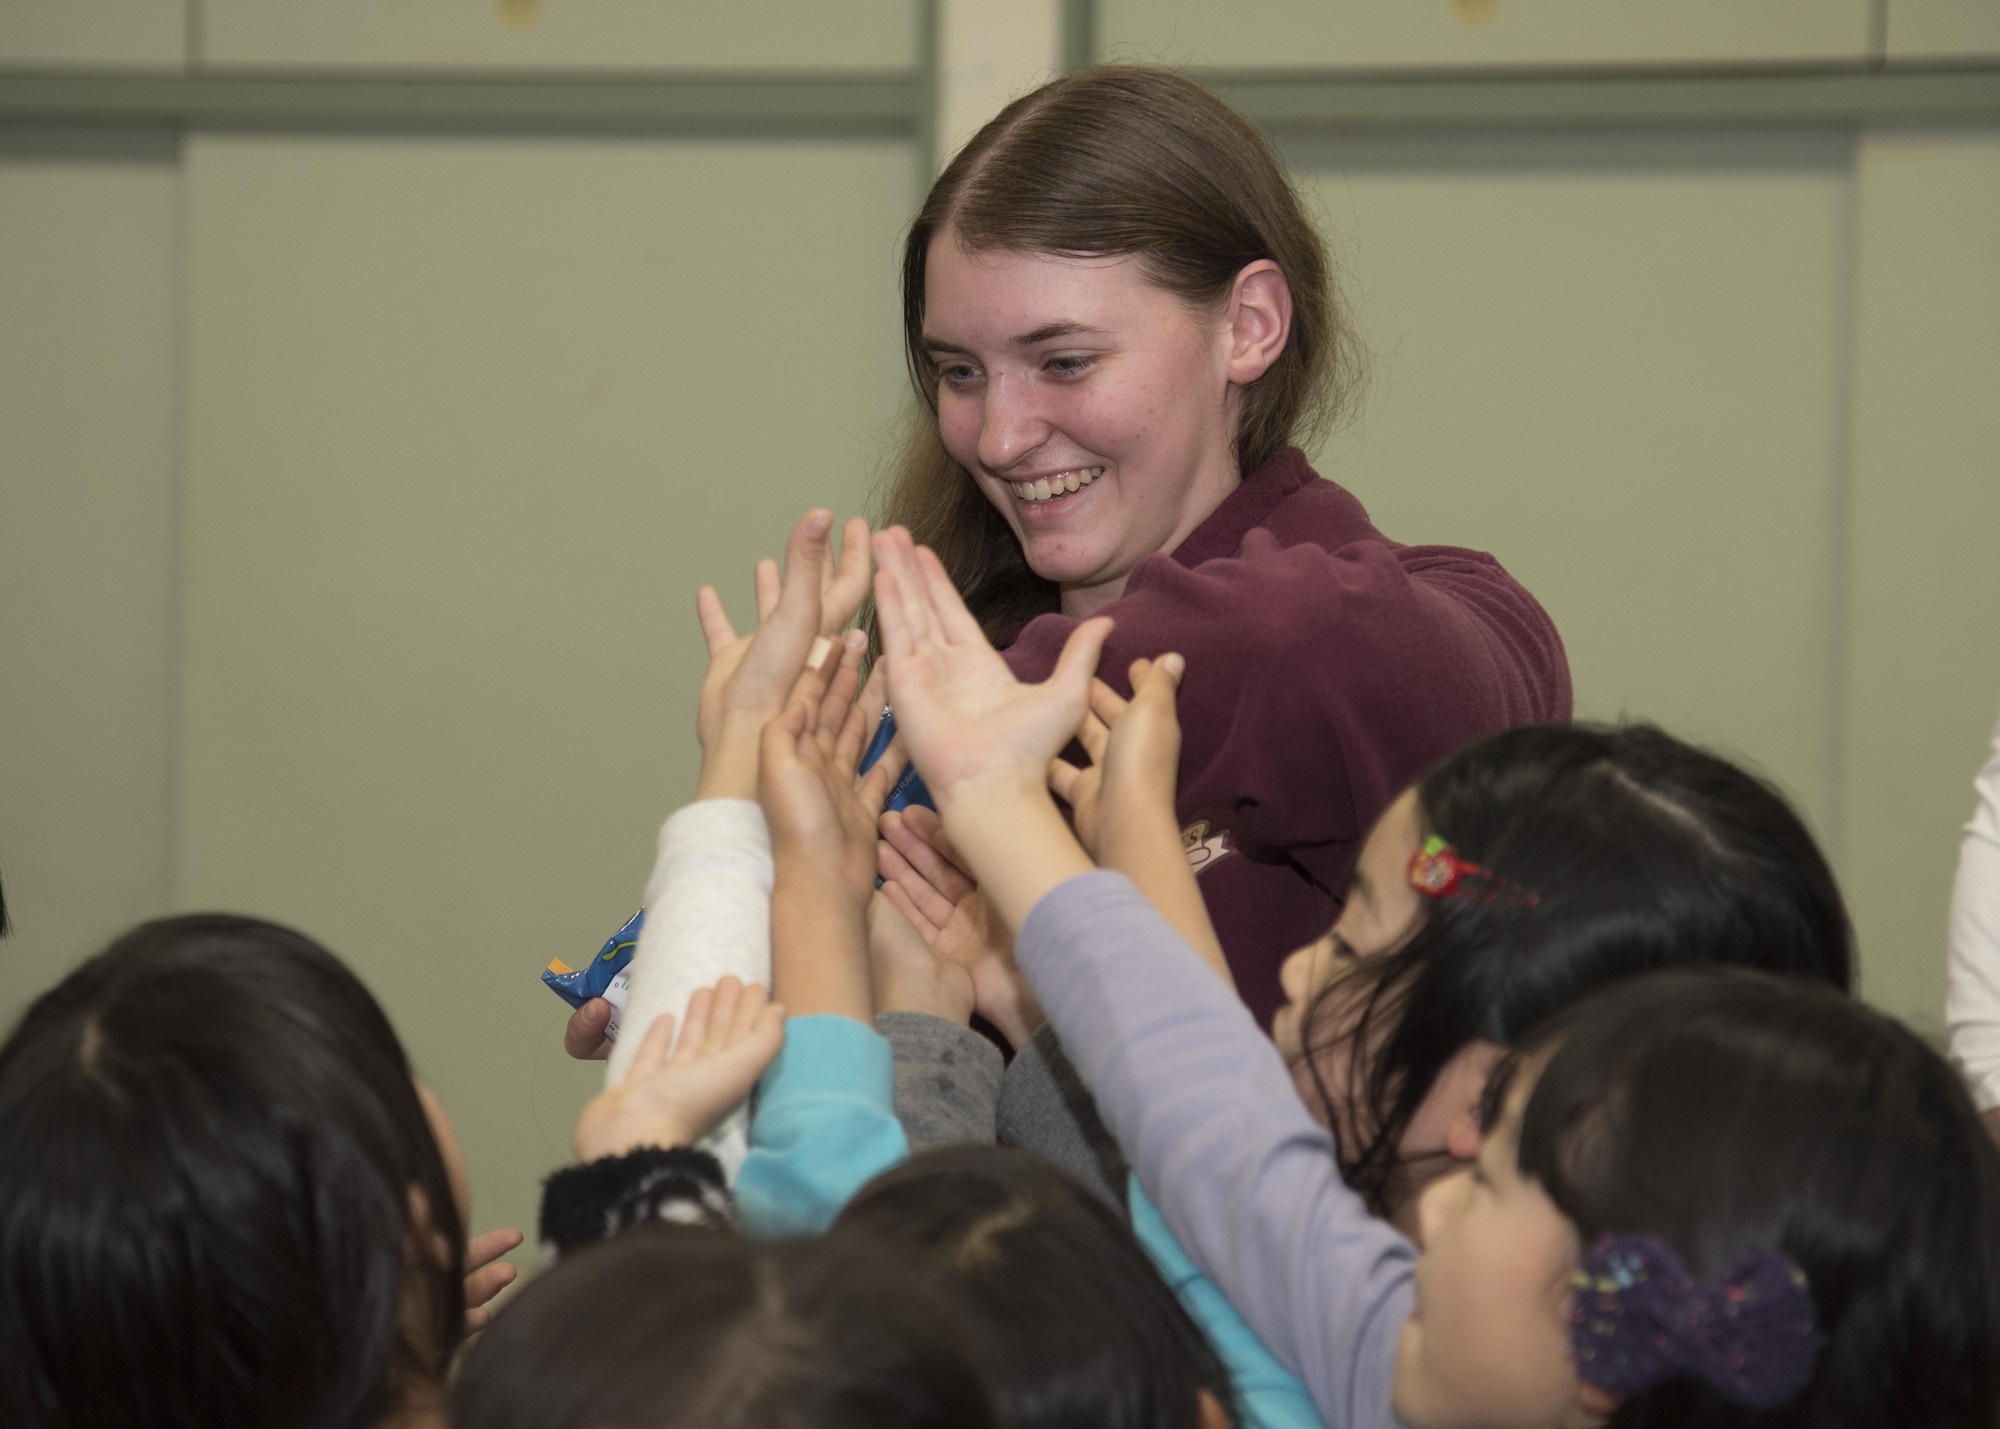 U.S. Air Force Airman 1st Class Allison Sokora, a 35th Communications Squadron cyber transport technician, hands out candy to children at Okamisawa Grade School, Misawa City, Japan, Nov. 22, 2016. According to 2nd Lt. Jacob McGill, the 35th Civil Engineer Squadron program development chief, said Jido-kan provides an outlet to expand and help others in the local community. (U.S. Air Force photo by Airman 1st Class Sadie Colbert)